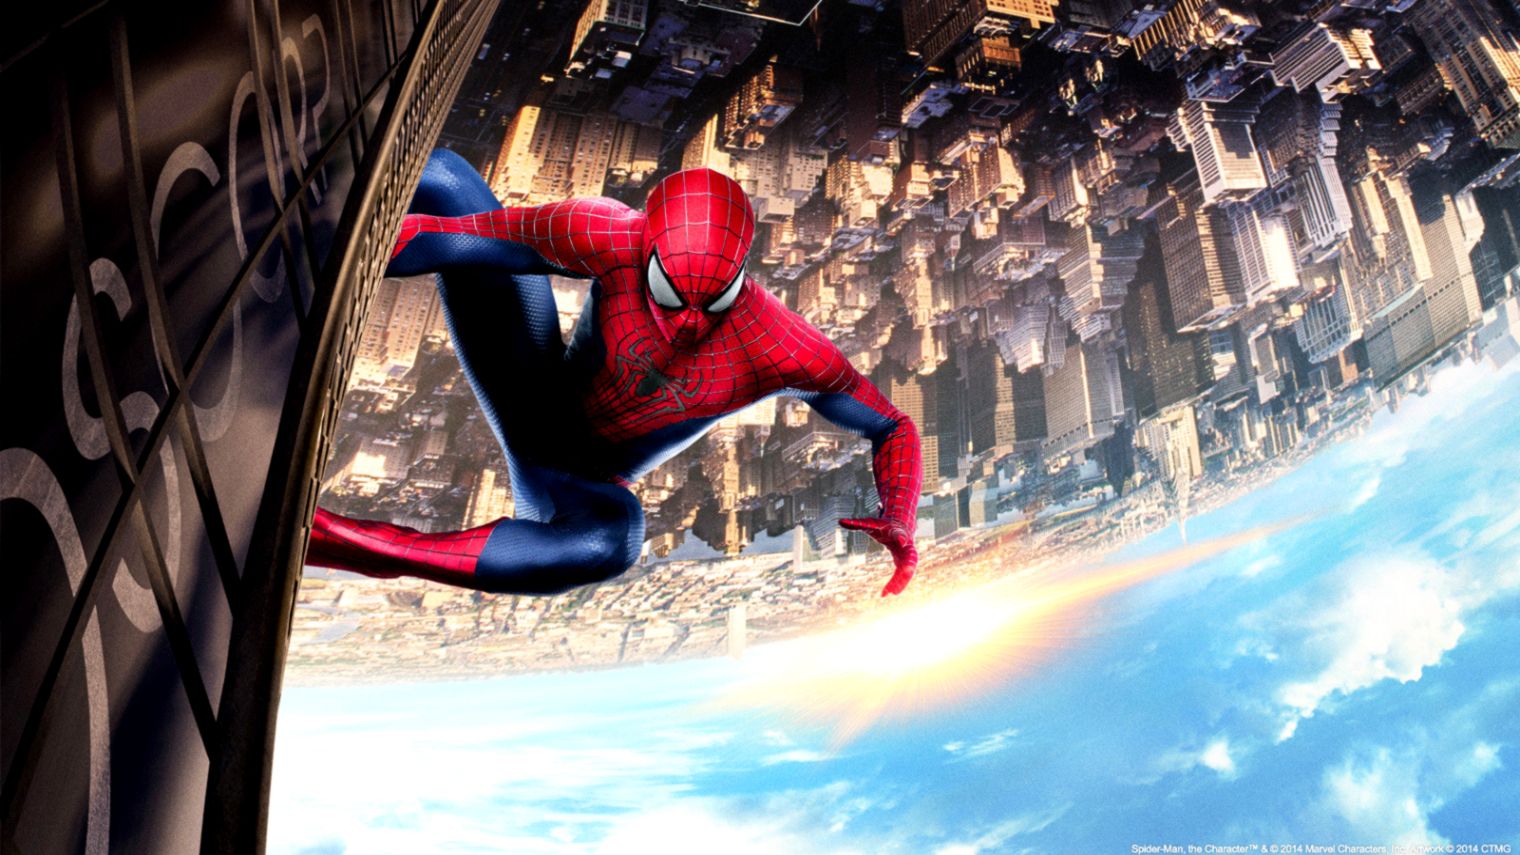 The Amazing Spider Man 2 Wallpapers Hd & Facebook Cover - Amazing Spiderman 2 Wallpaper Hd - HD Wallpaper 